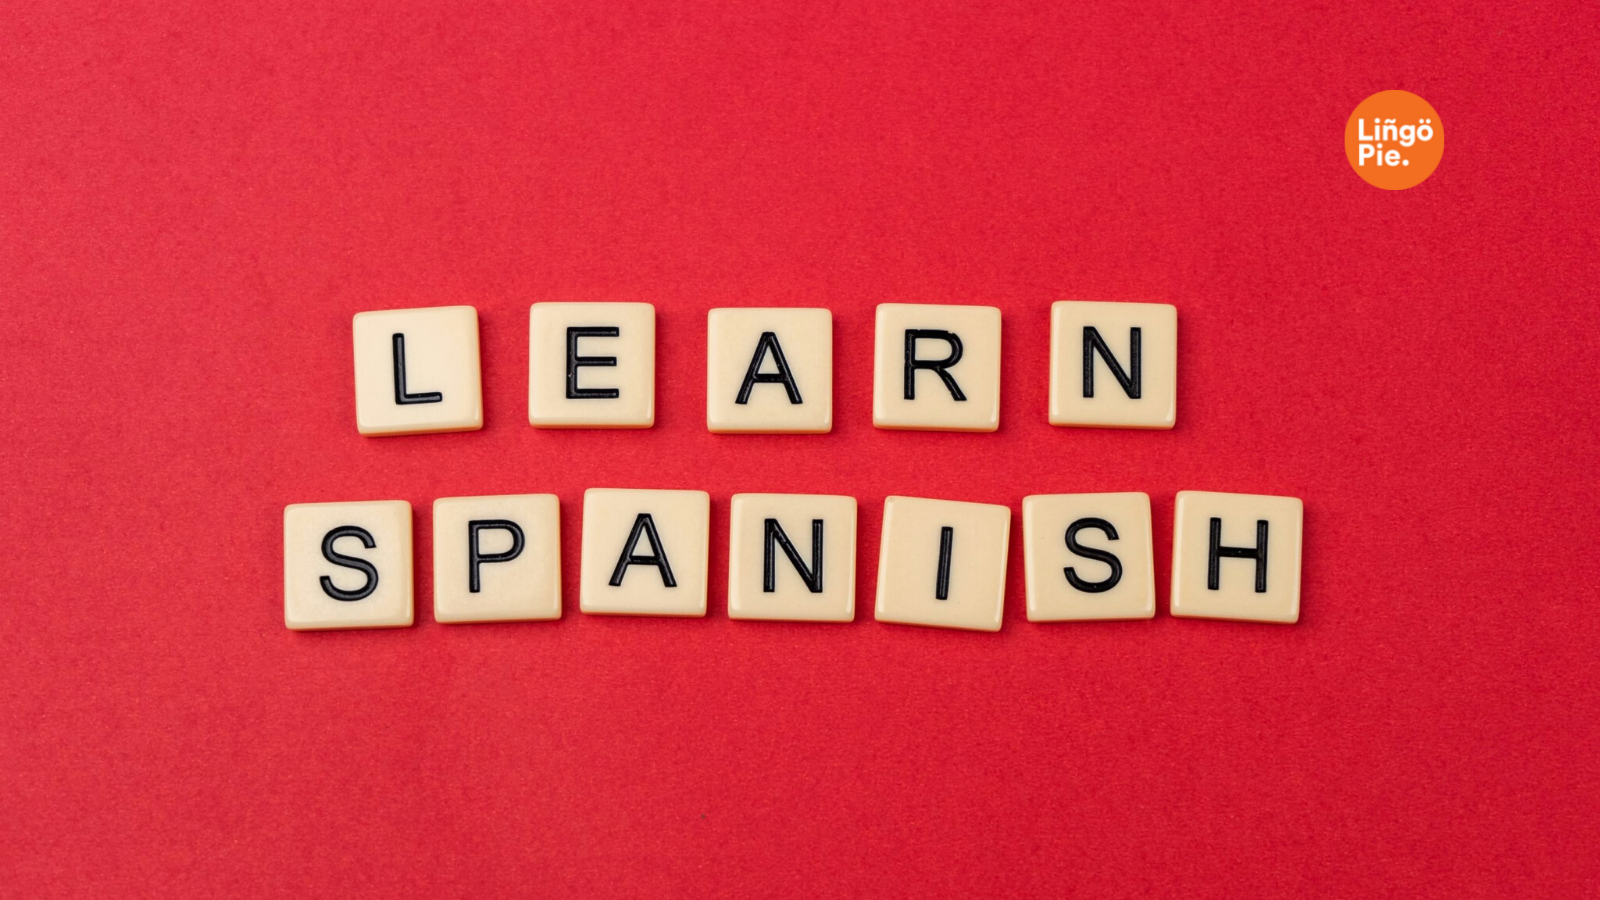 Learn Spanish for Less and Find the Best Online Spanish Tutors